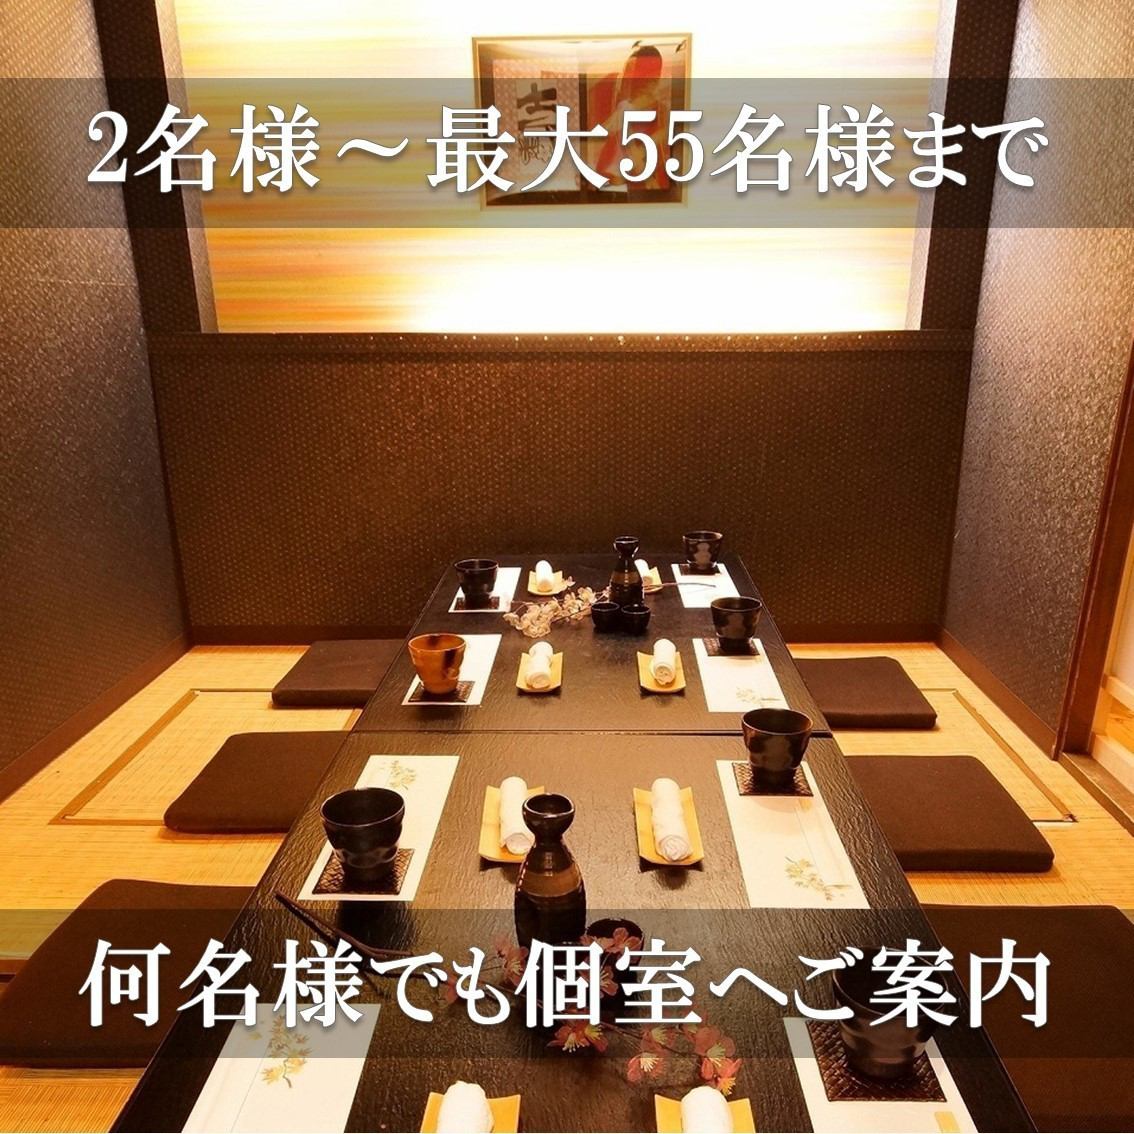 [Completely private room/up to 55 people] Unlimited seating time! You can have a relaxing banquet